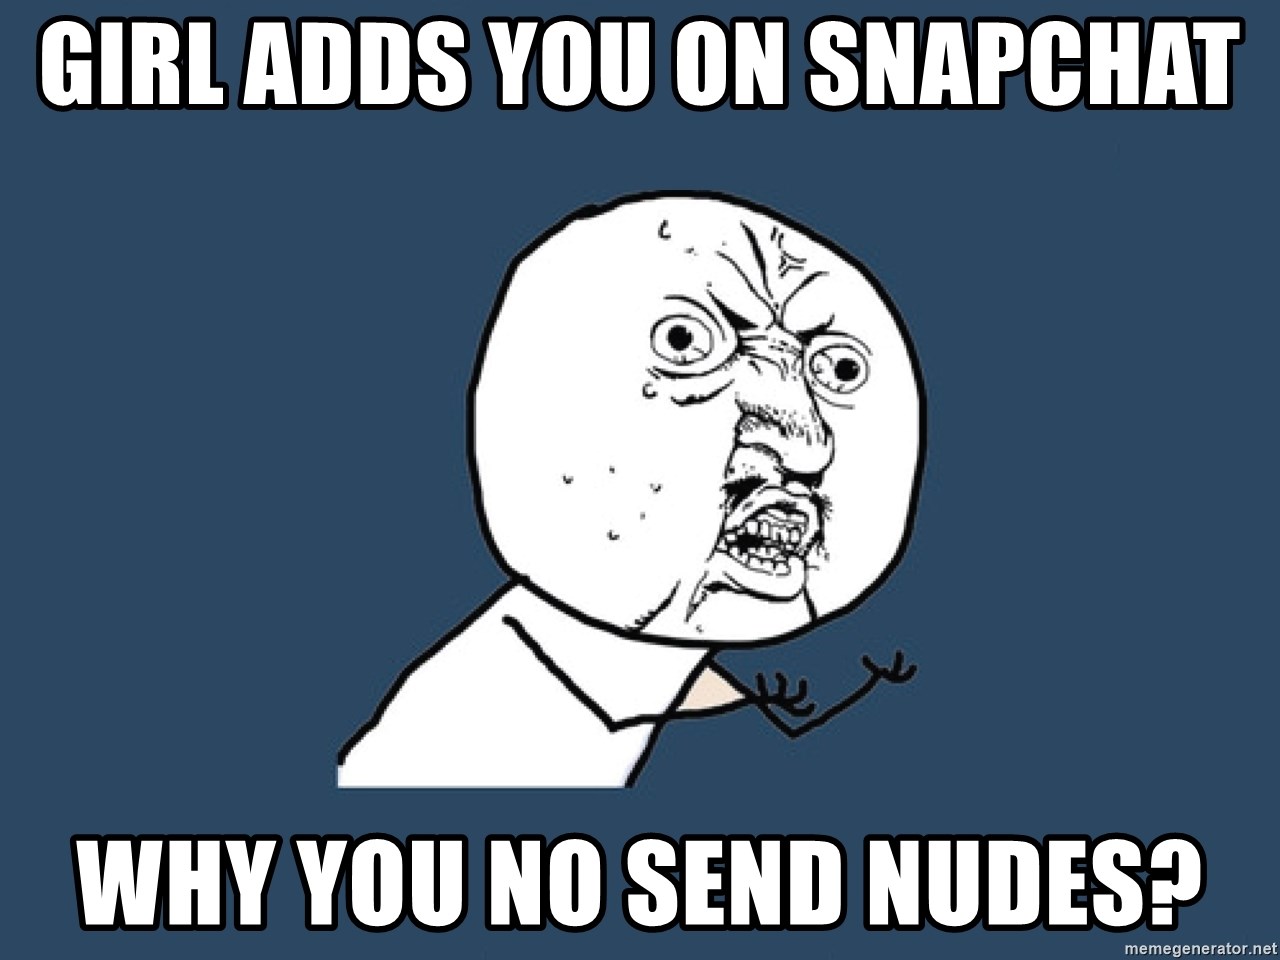 Snapchats that will send nudes